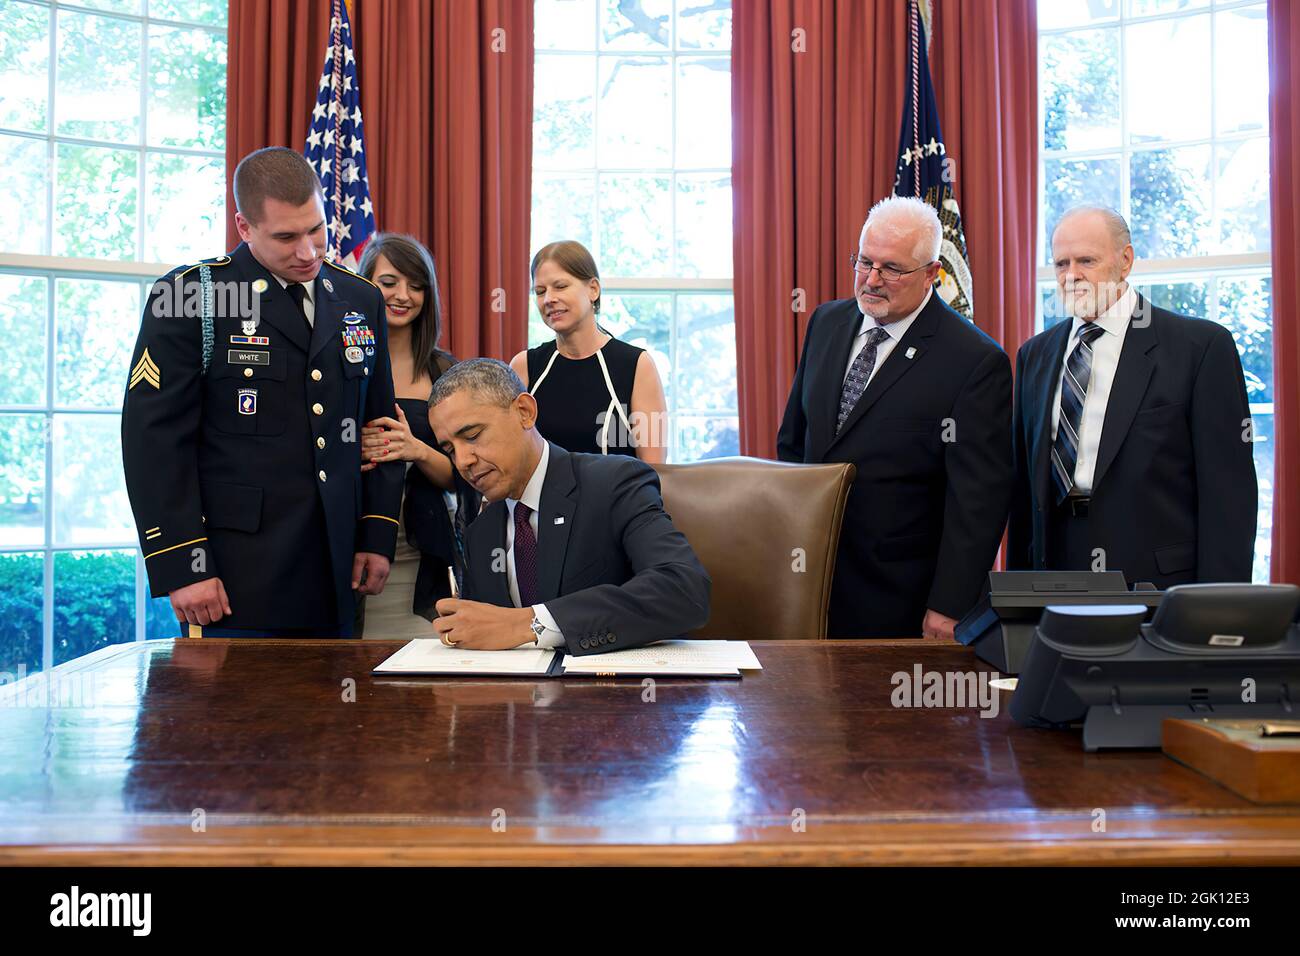 President Barack Obama signs the Medal of Honor award citation for Sergeant Kyle J. White in the Oval Office prior to a Medal of Honor ceremony in the East Room of the White House, May 13, 2014.  Sgt. White received the Medal of Honor for his courageous actions while serving as a Platoon Radio Telephone Operator assigned to C Company, 2nd Battalion (Airborne), 503rd Infantry Regiment, 173rd Airborne Brigade, during combat operations against an armed enemy in Nuristan Province, Afghanistan on November 9, 2007. (Official White House Photo by Pete Souza)   This official White House photograph is Stock Photo